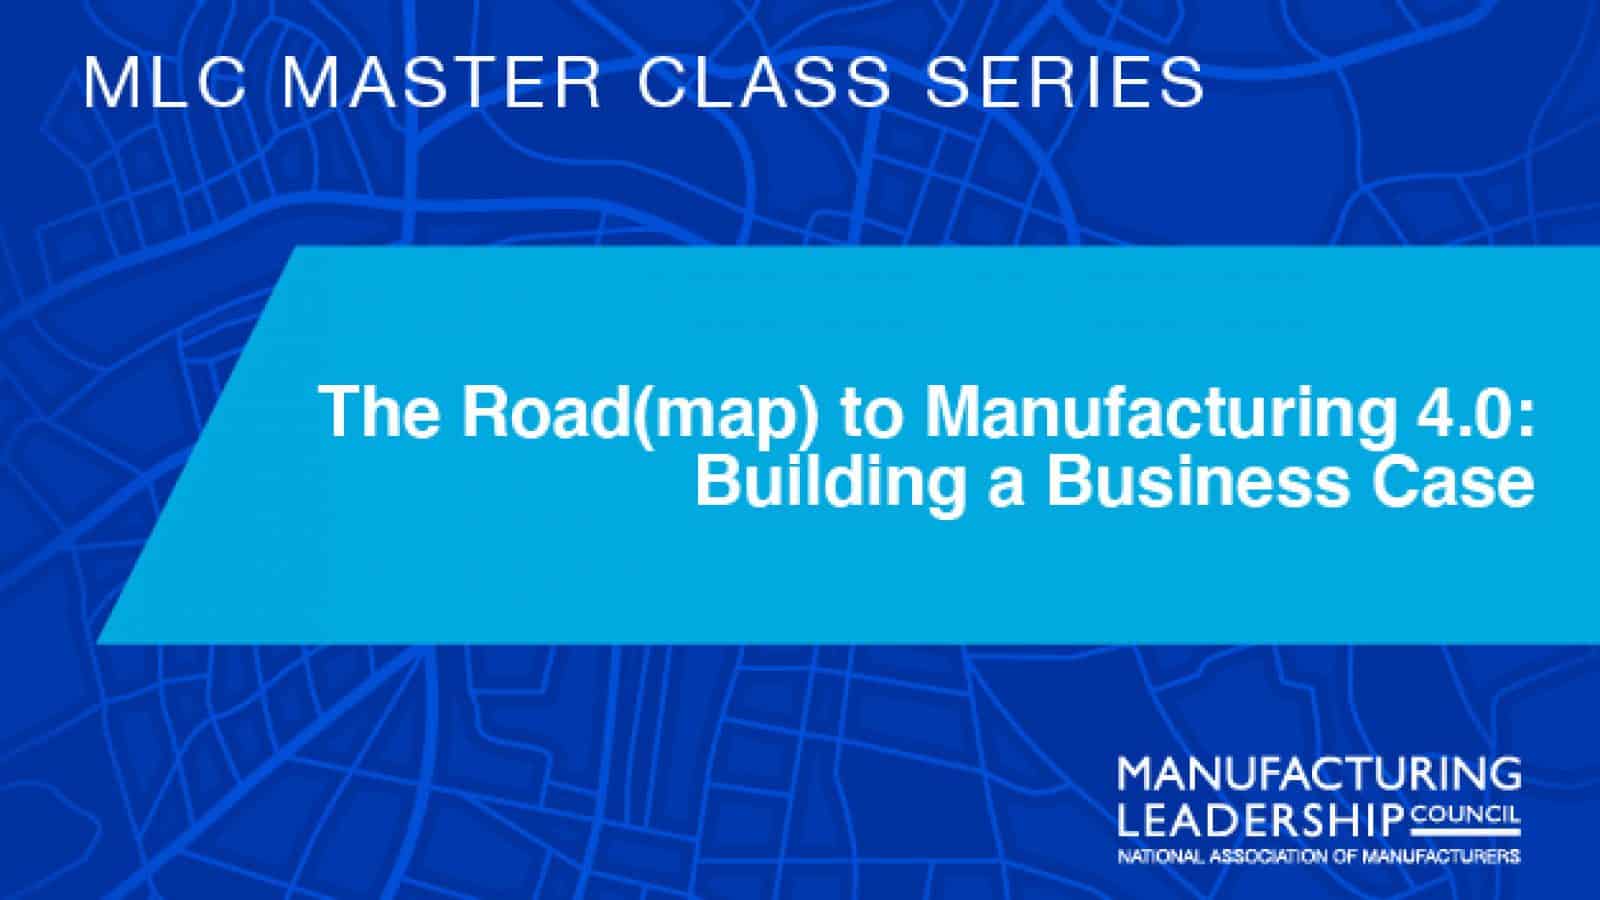 The Road(map) to Manufacturing 4.0: Building a Business Case